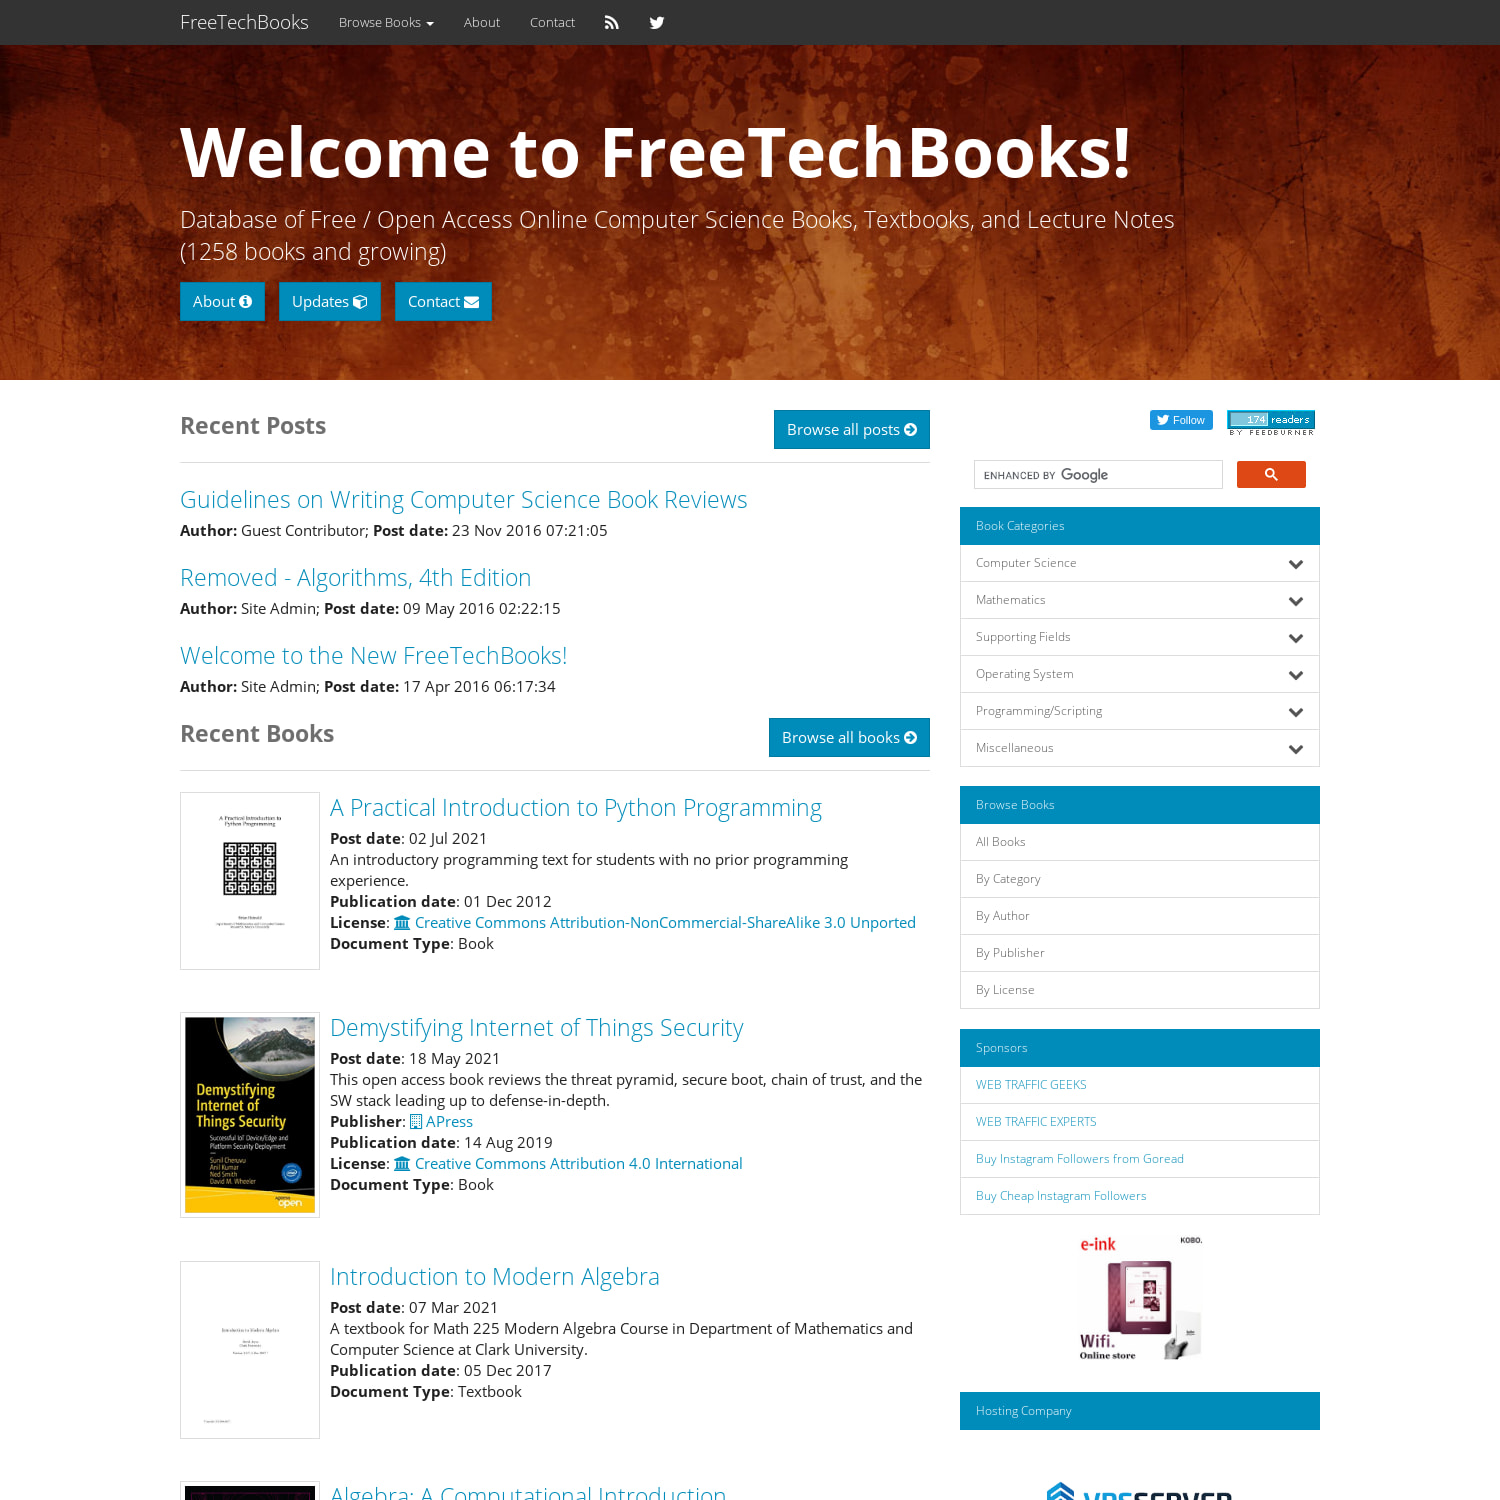 Free / Open Acess Online Computer Science Books, Textbooks, and Lecture Notes